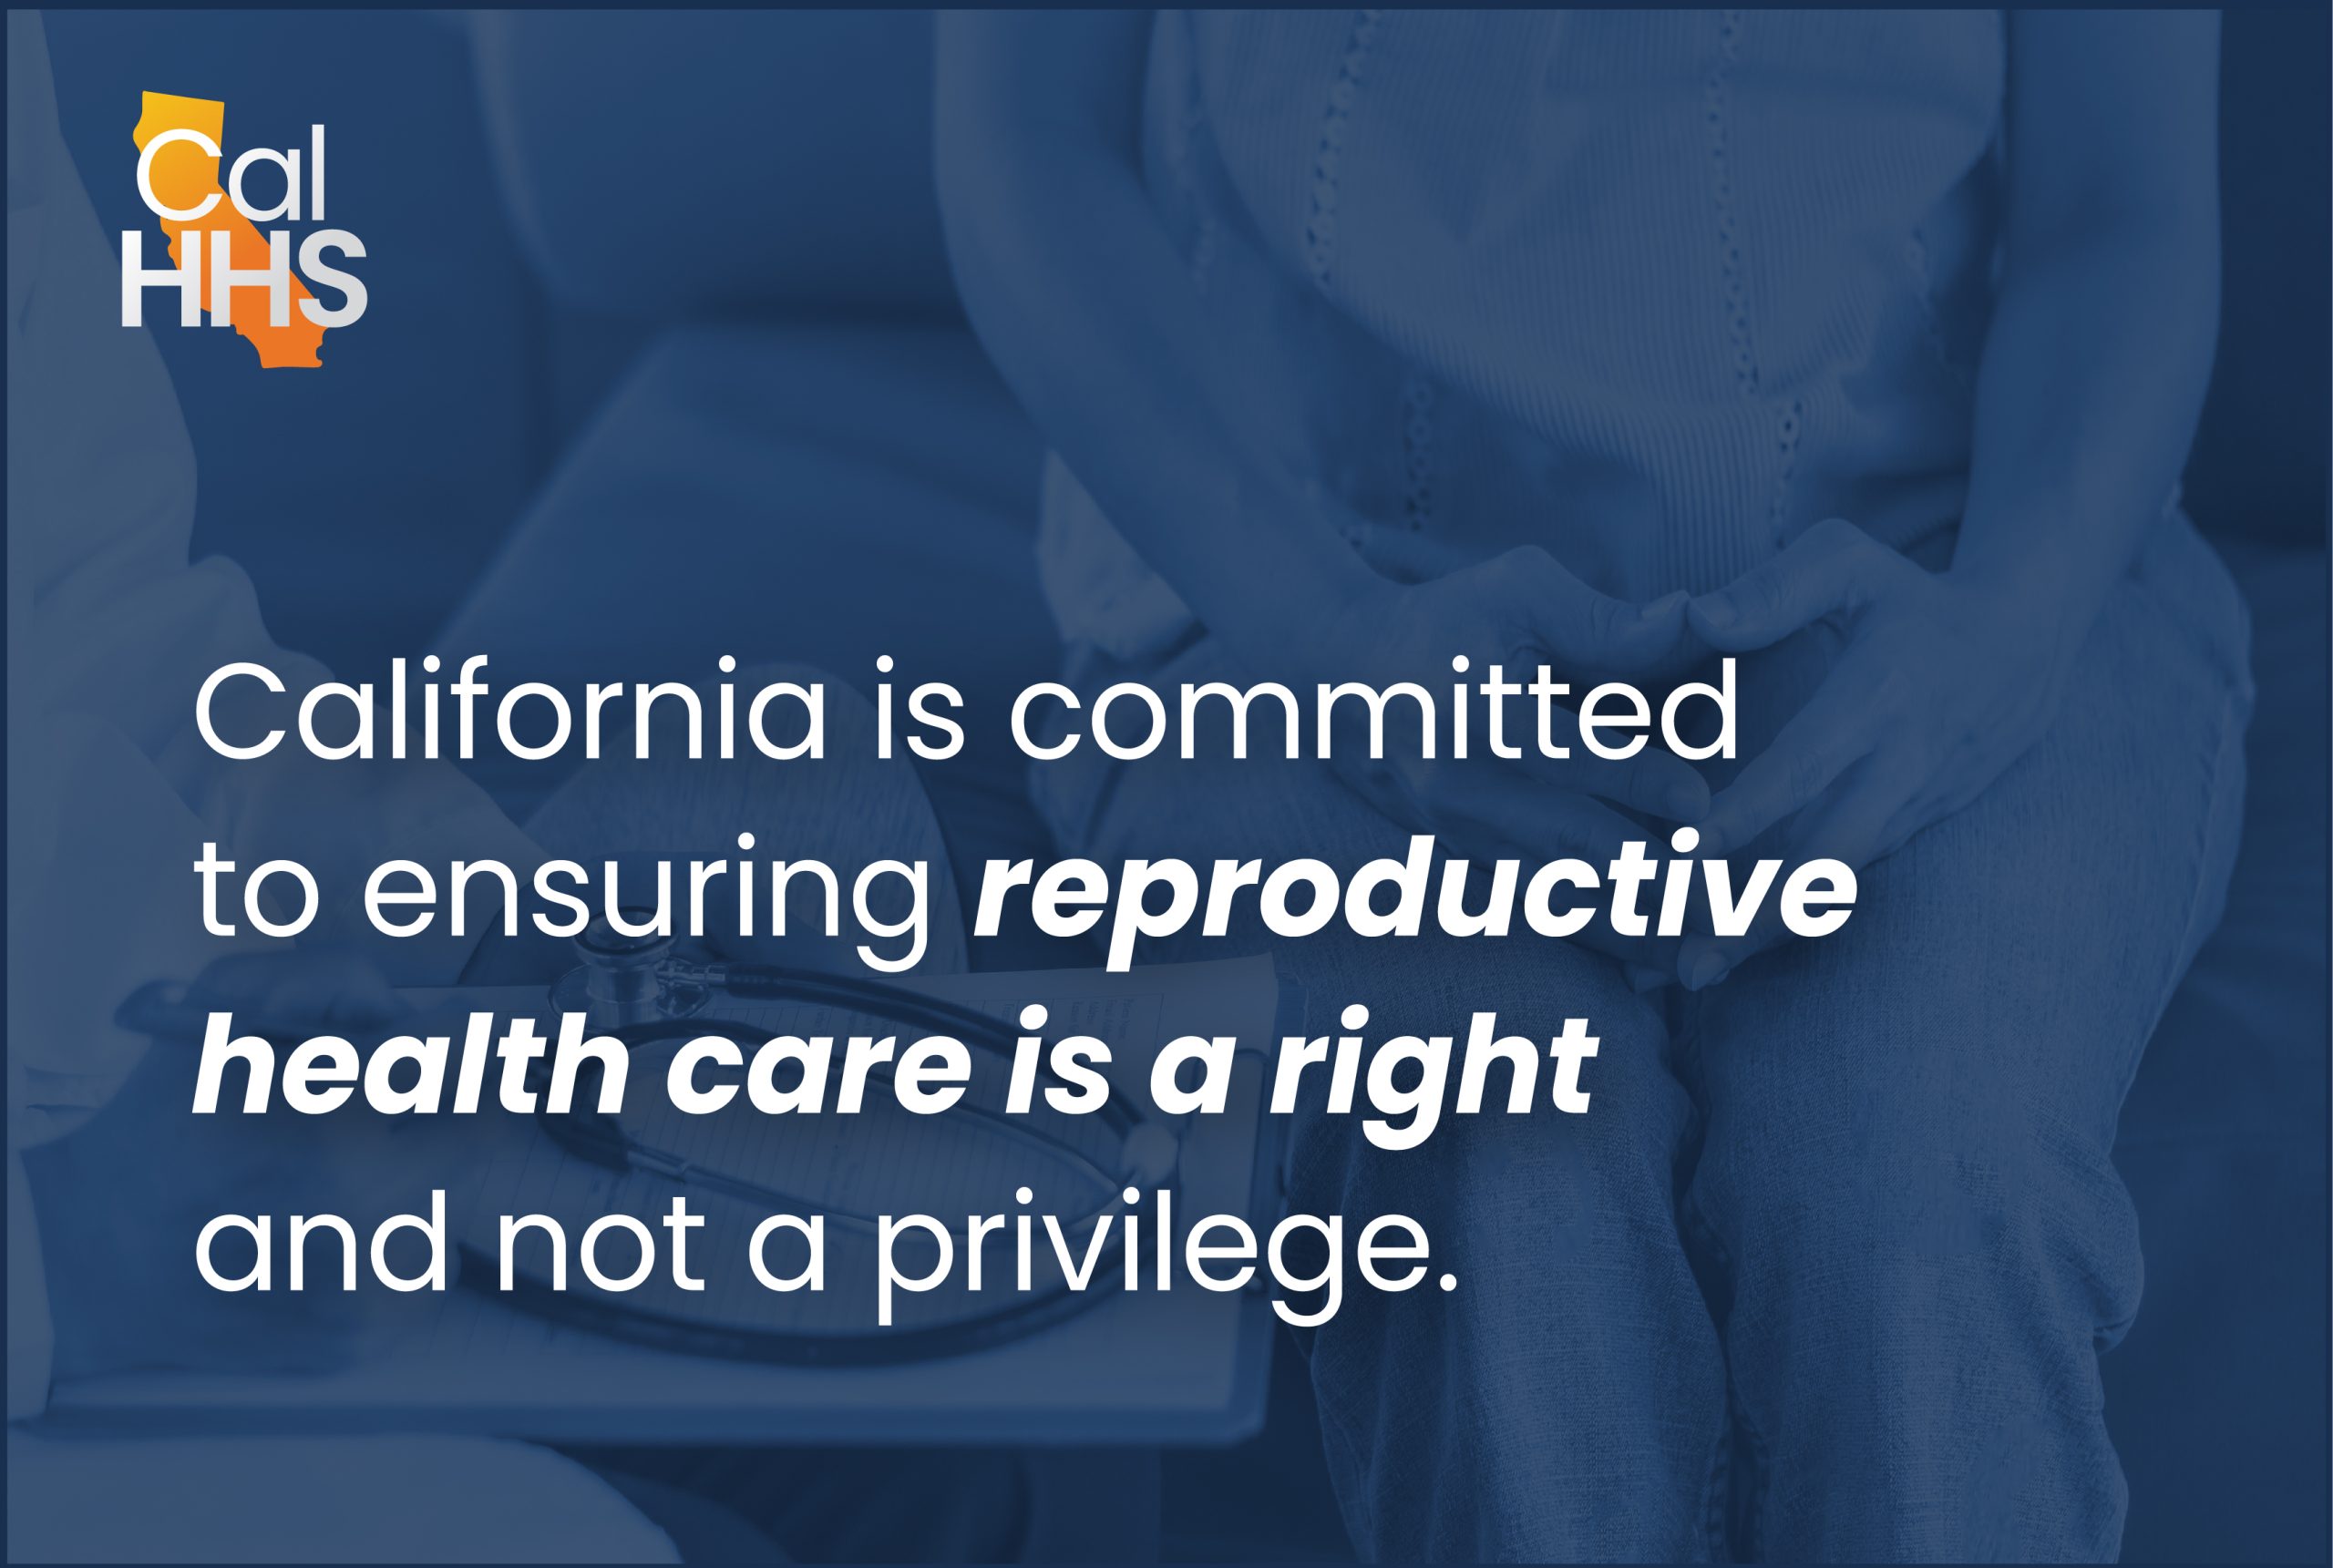 California is committed to ensuring reproductive health care is a right and not a privilege.